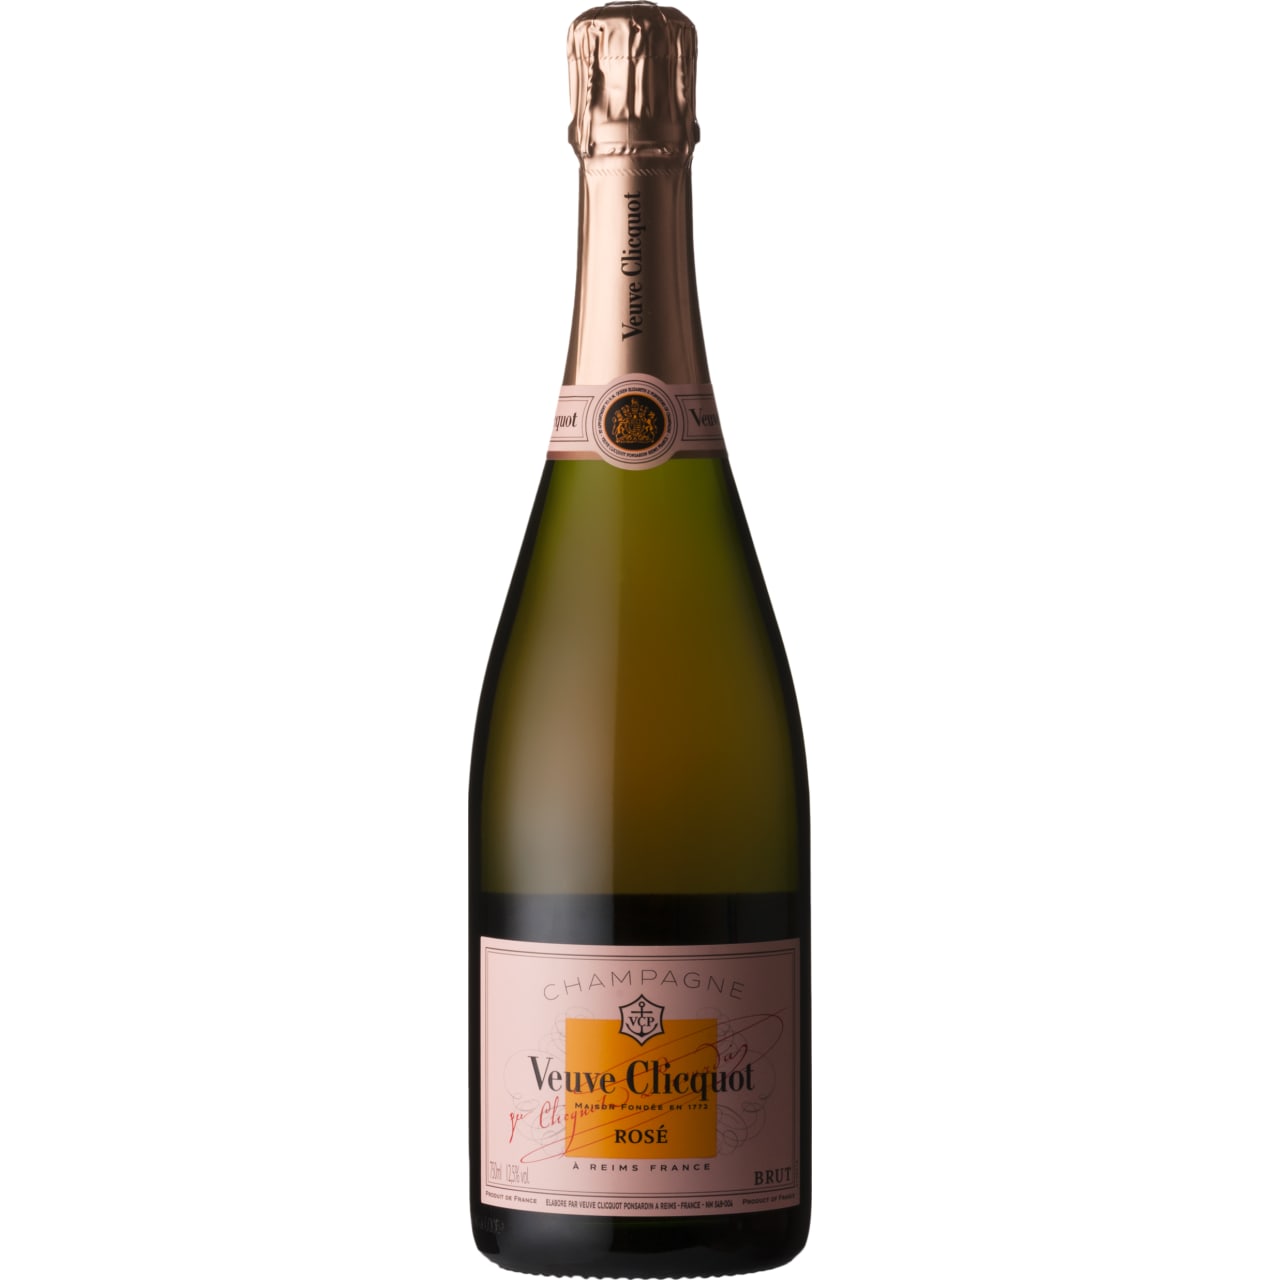 In line with the style of the Veuve Clicquot House, the wine is perfectly balanced and combines elegance and personality.